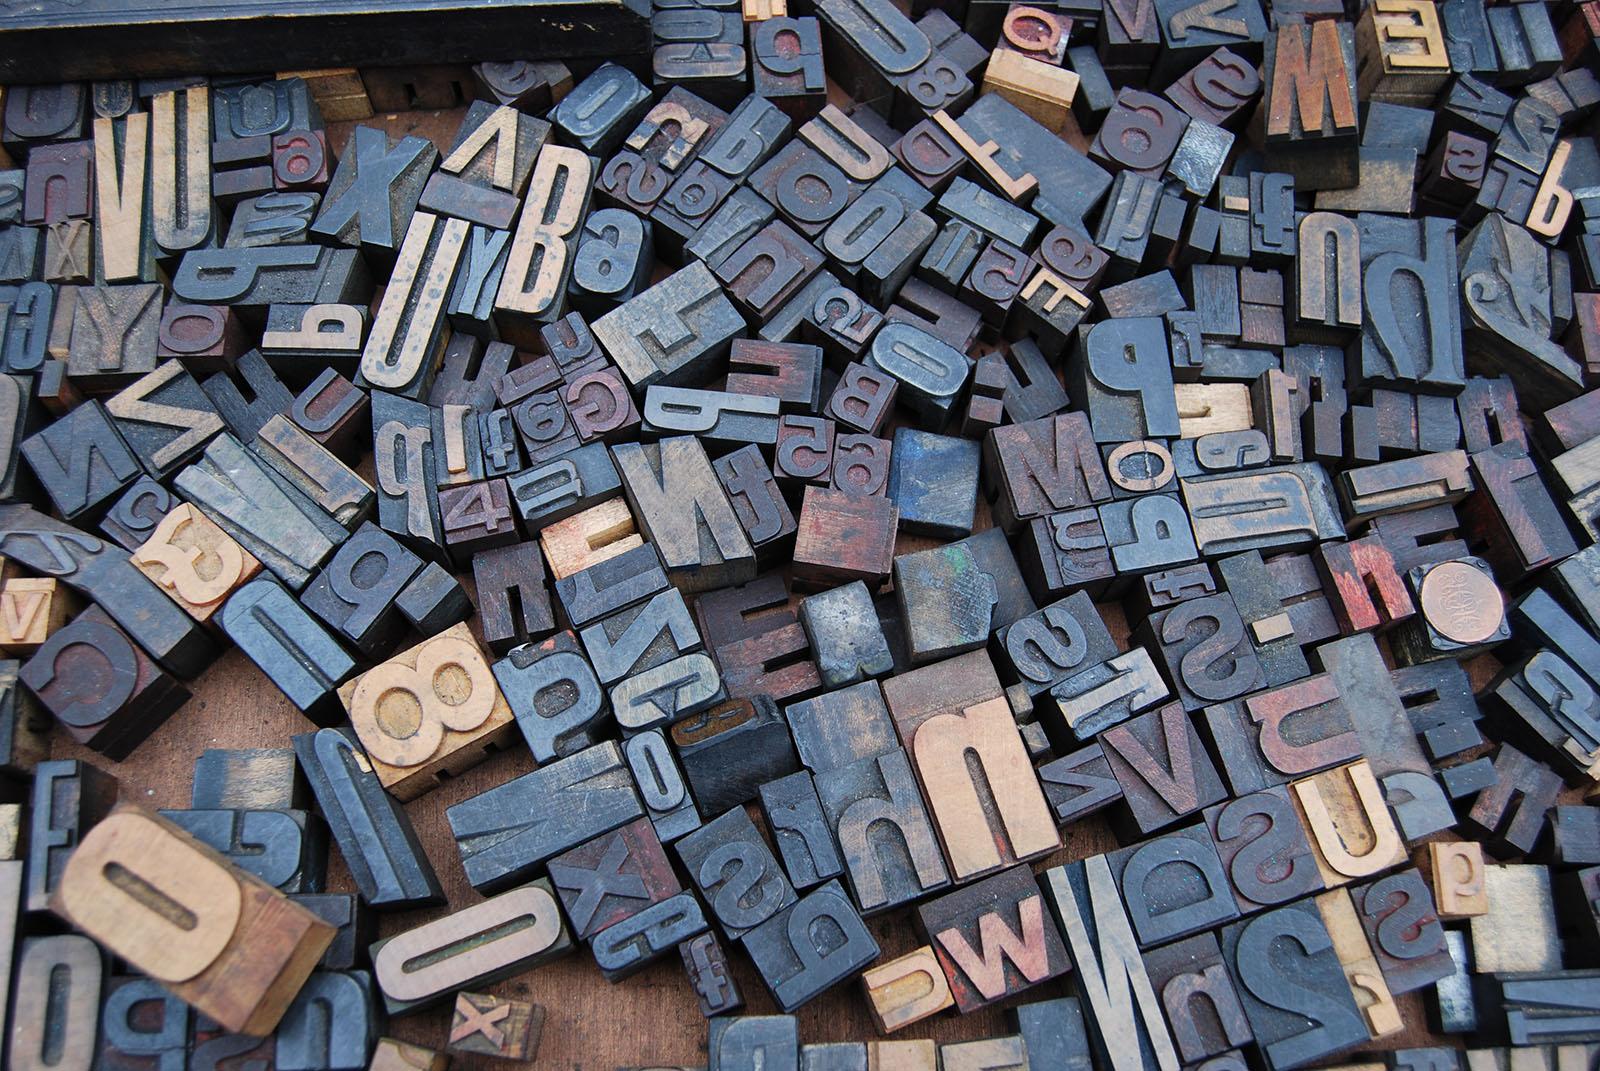 Pile of printing press letters